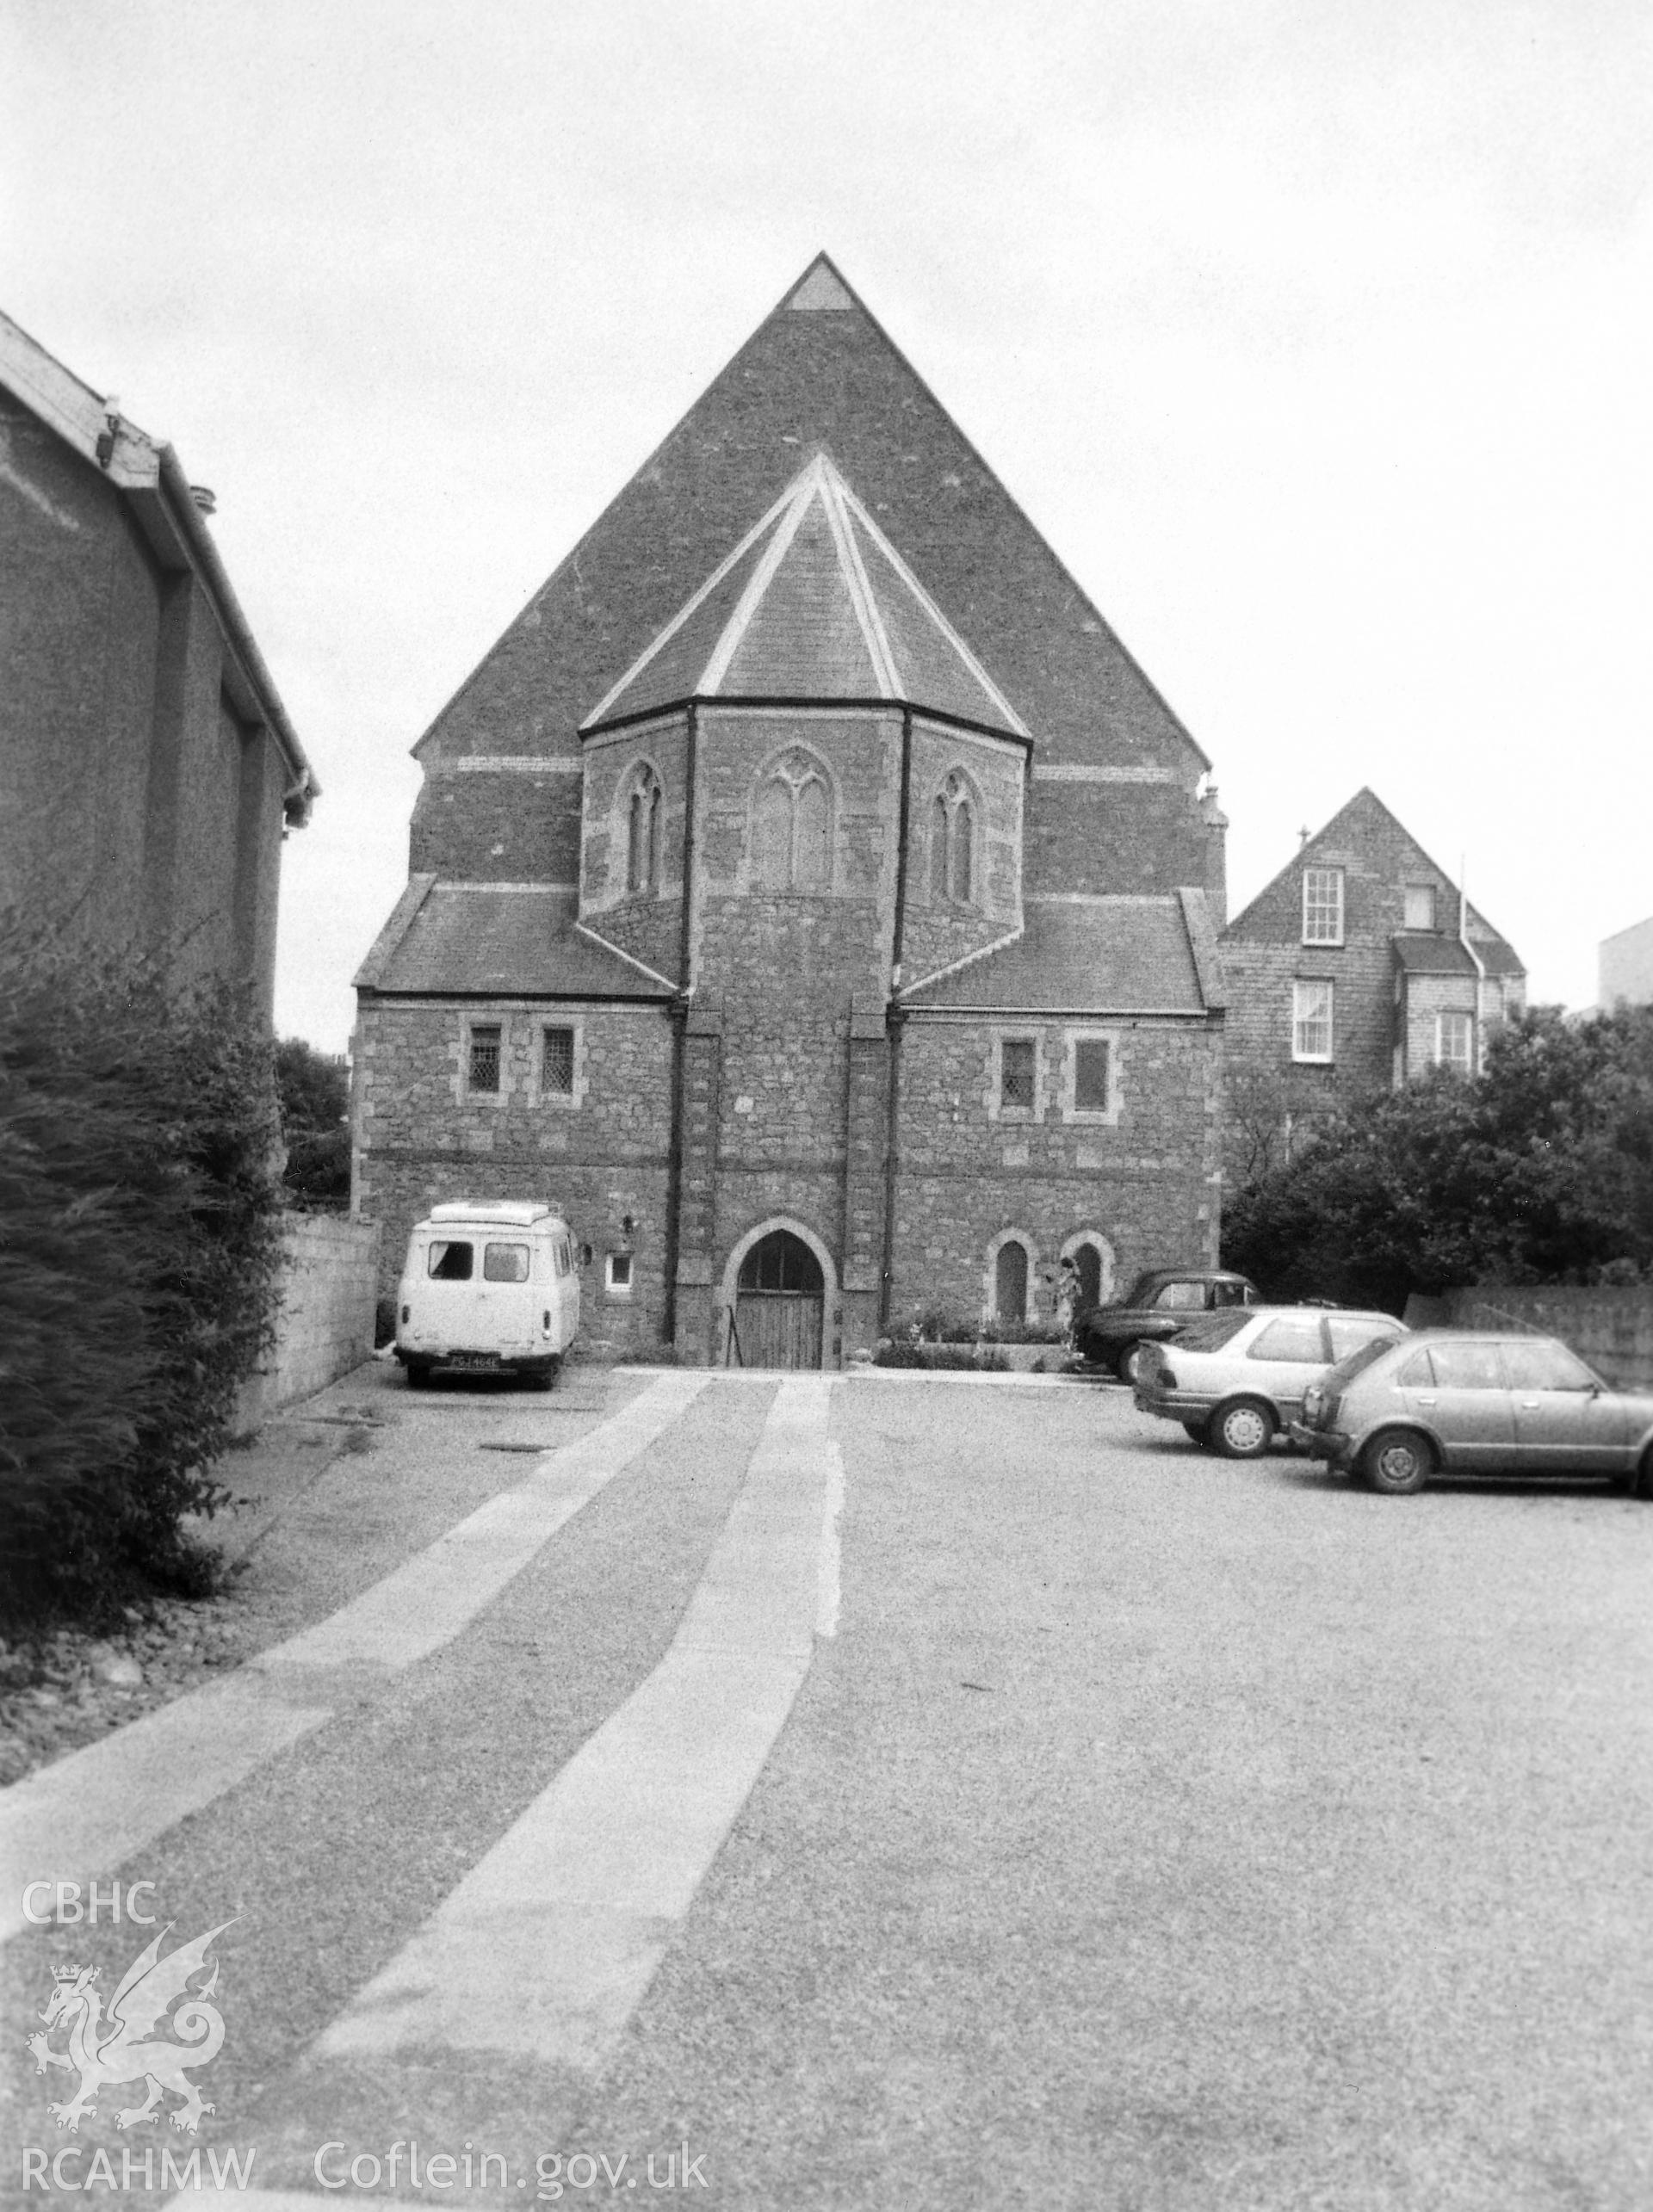 Digital copy of a black and white photograph showing an exterior view of Deer Park Baptist Chapel, Tenby, taken by Robert Scourfield, 1995.